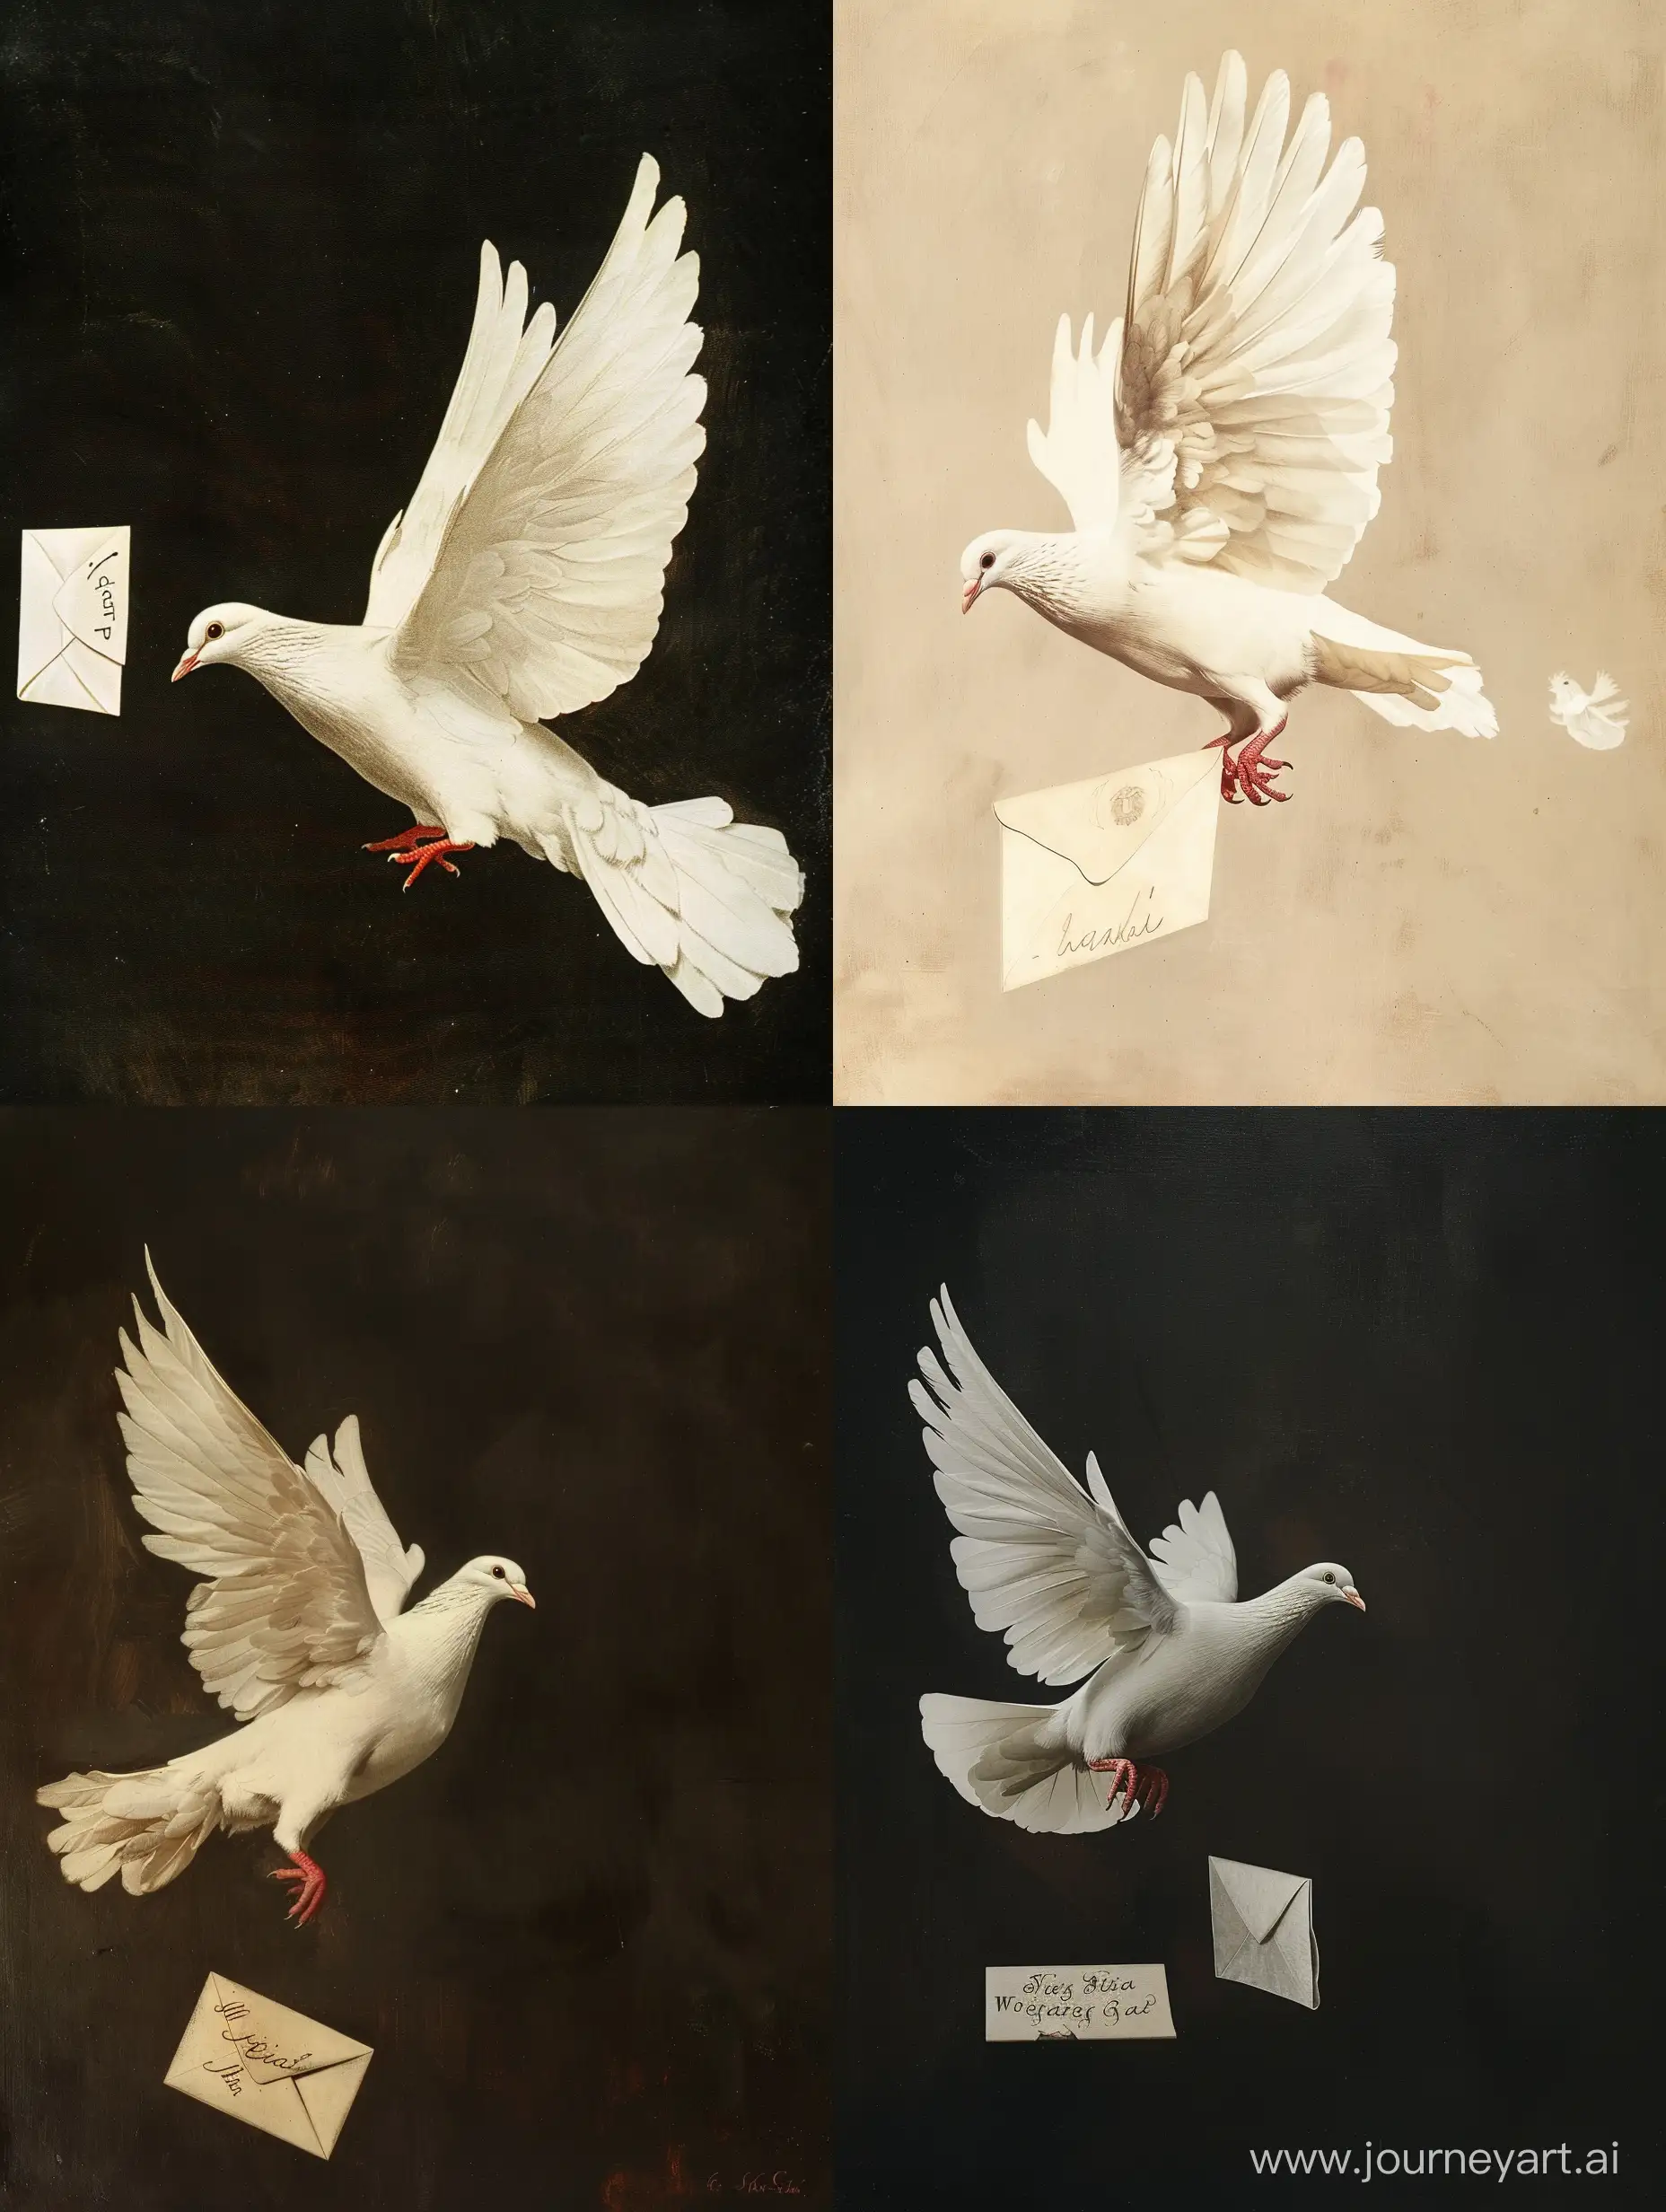 A white dove on the left side of the image in flight with a letter at its feet